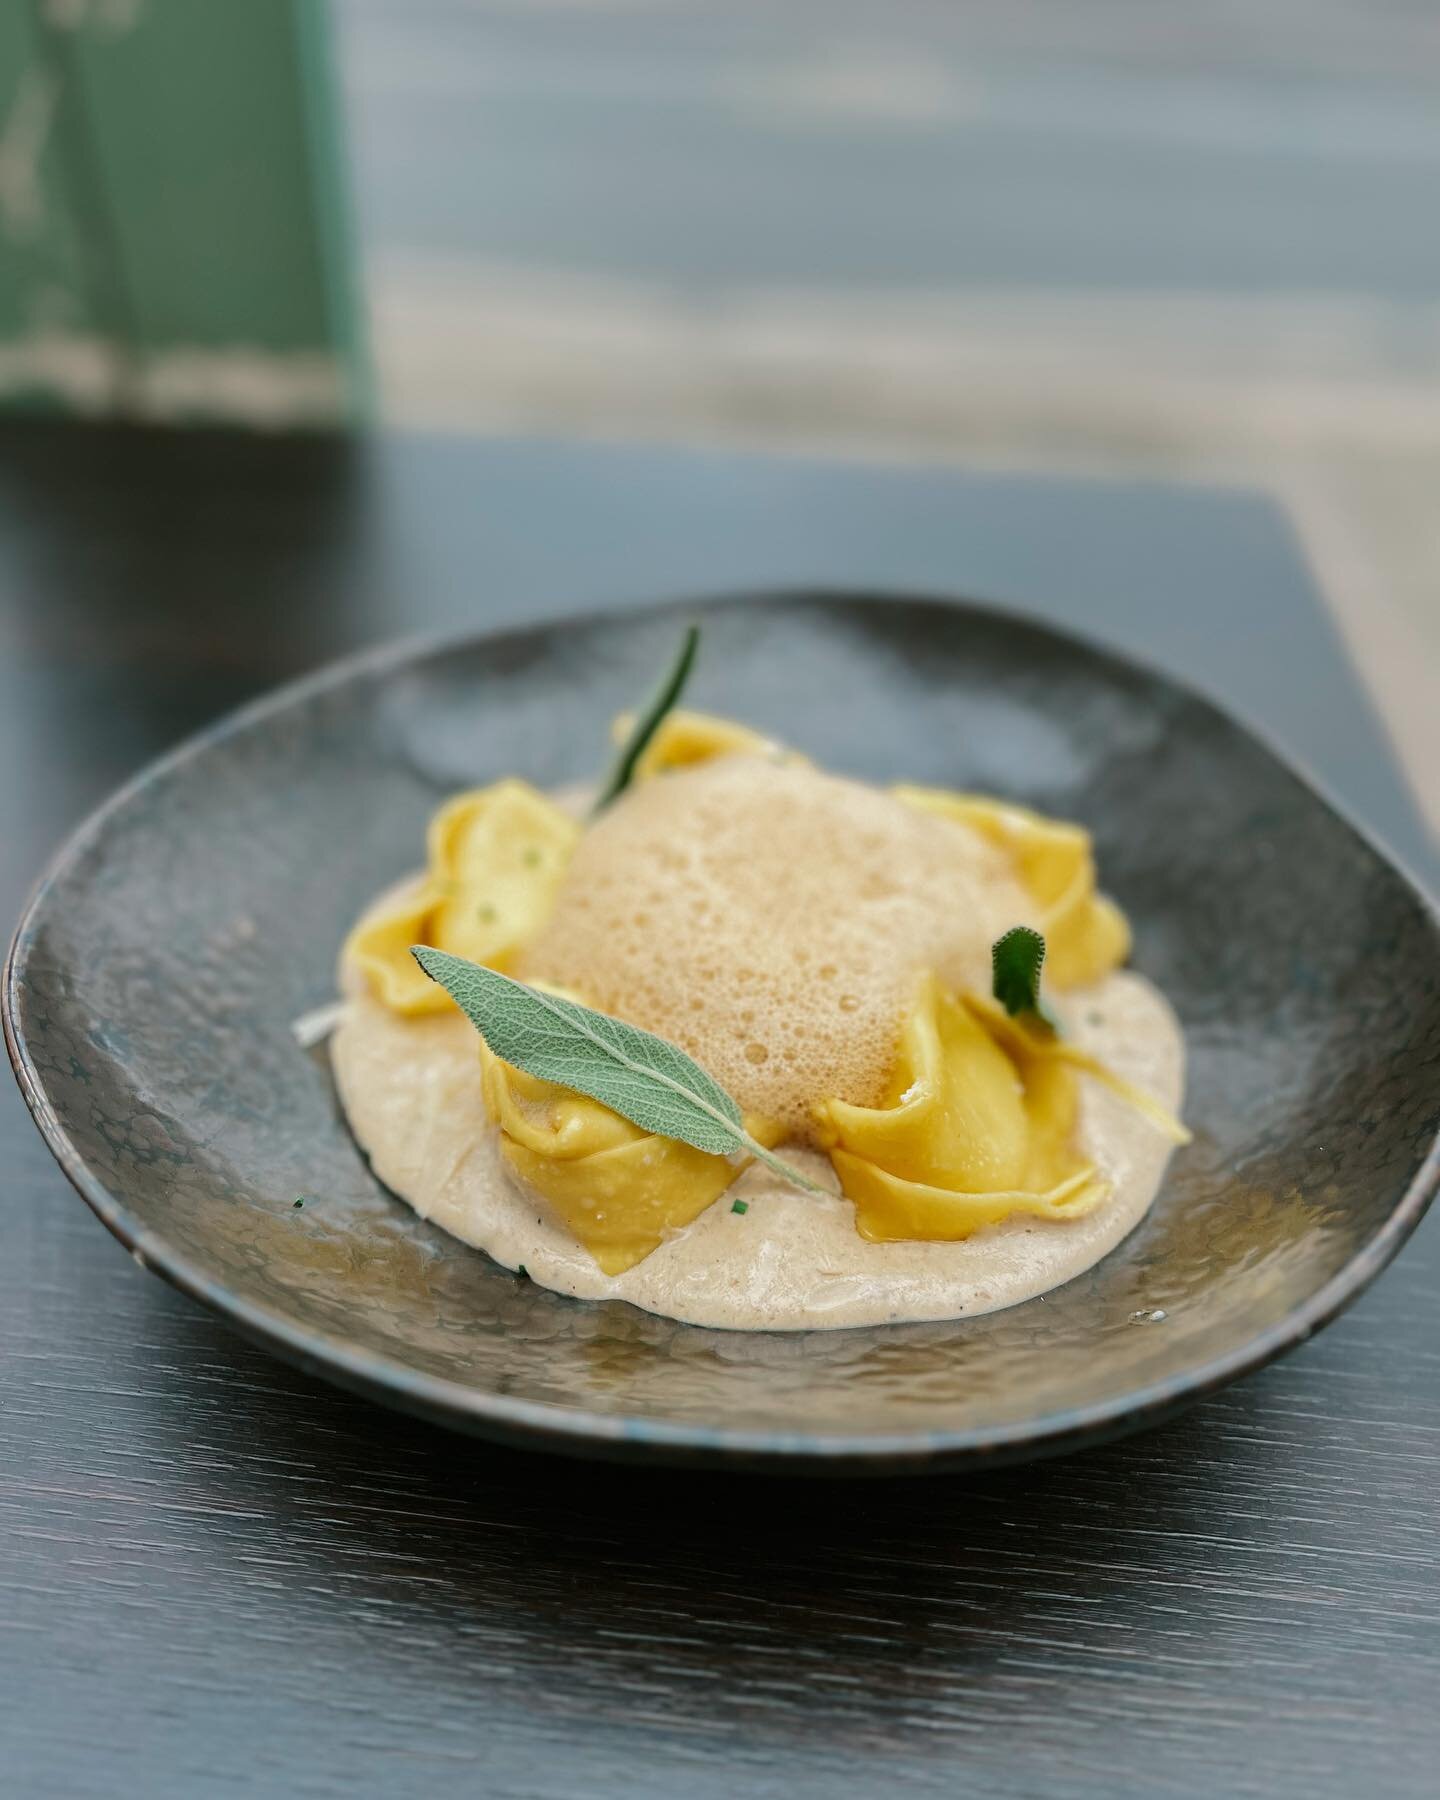 When a special makes it to the main menu, you know it&rsquo;s proved itself. Thanks to all your lovely feedback this burrata and black truffle tortellini is here to stay! Don&rsquo;t just take our word for it, come and try it on our evening menu now.